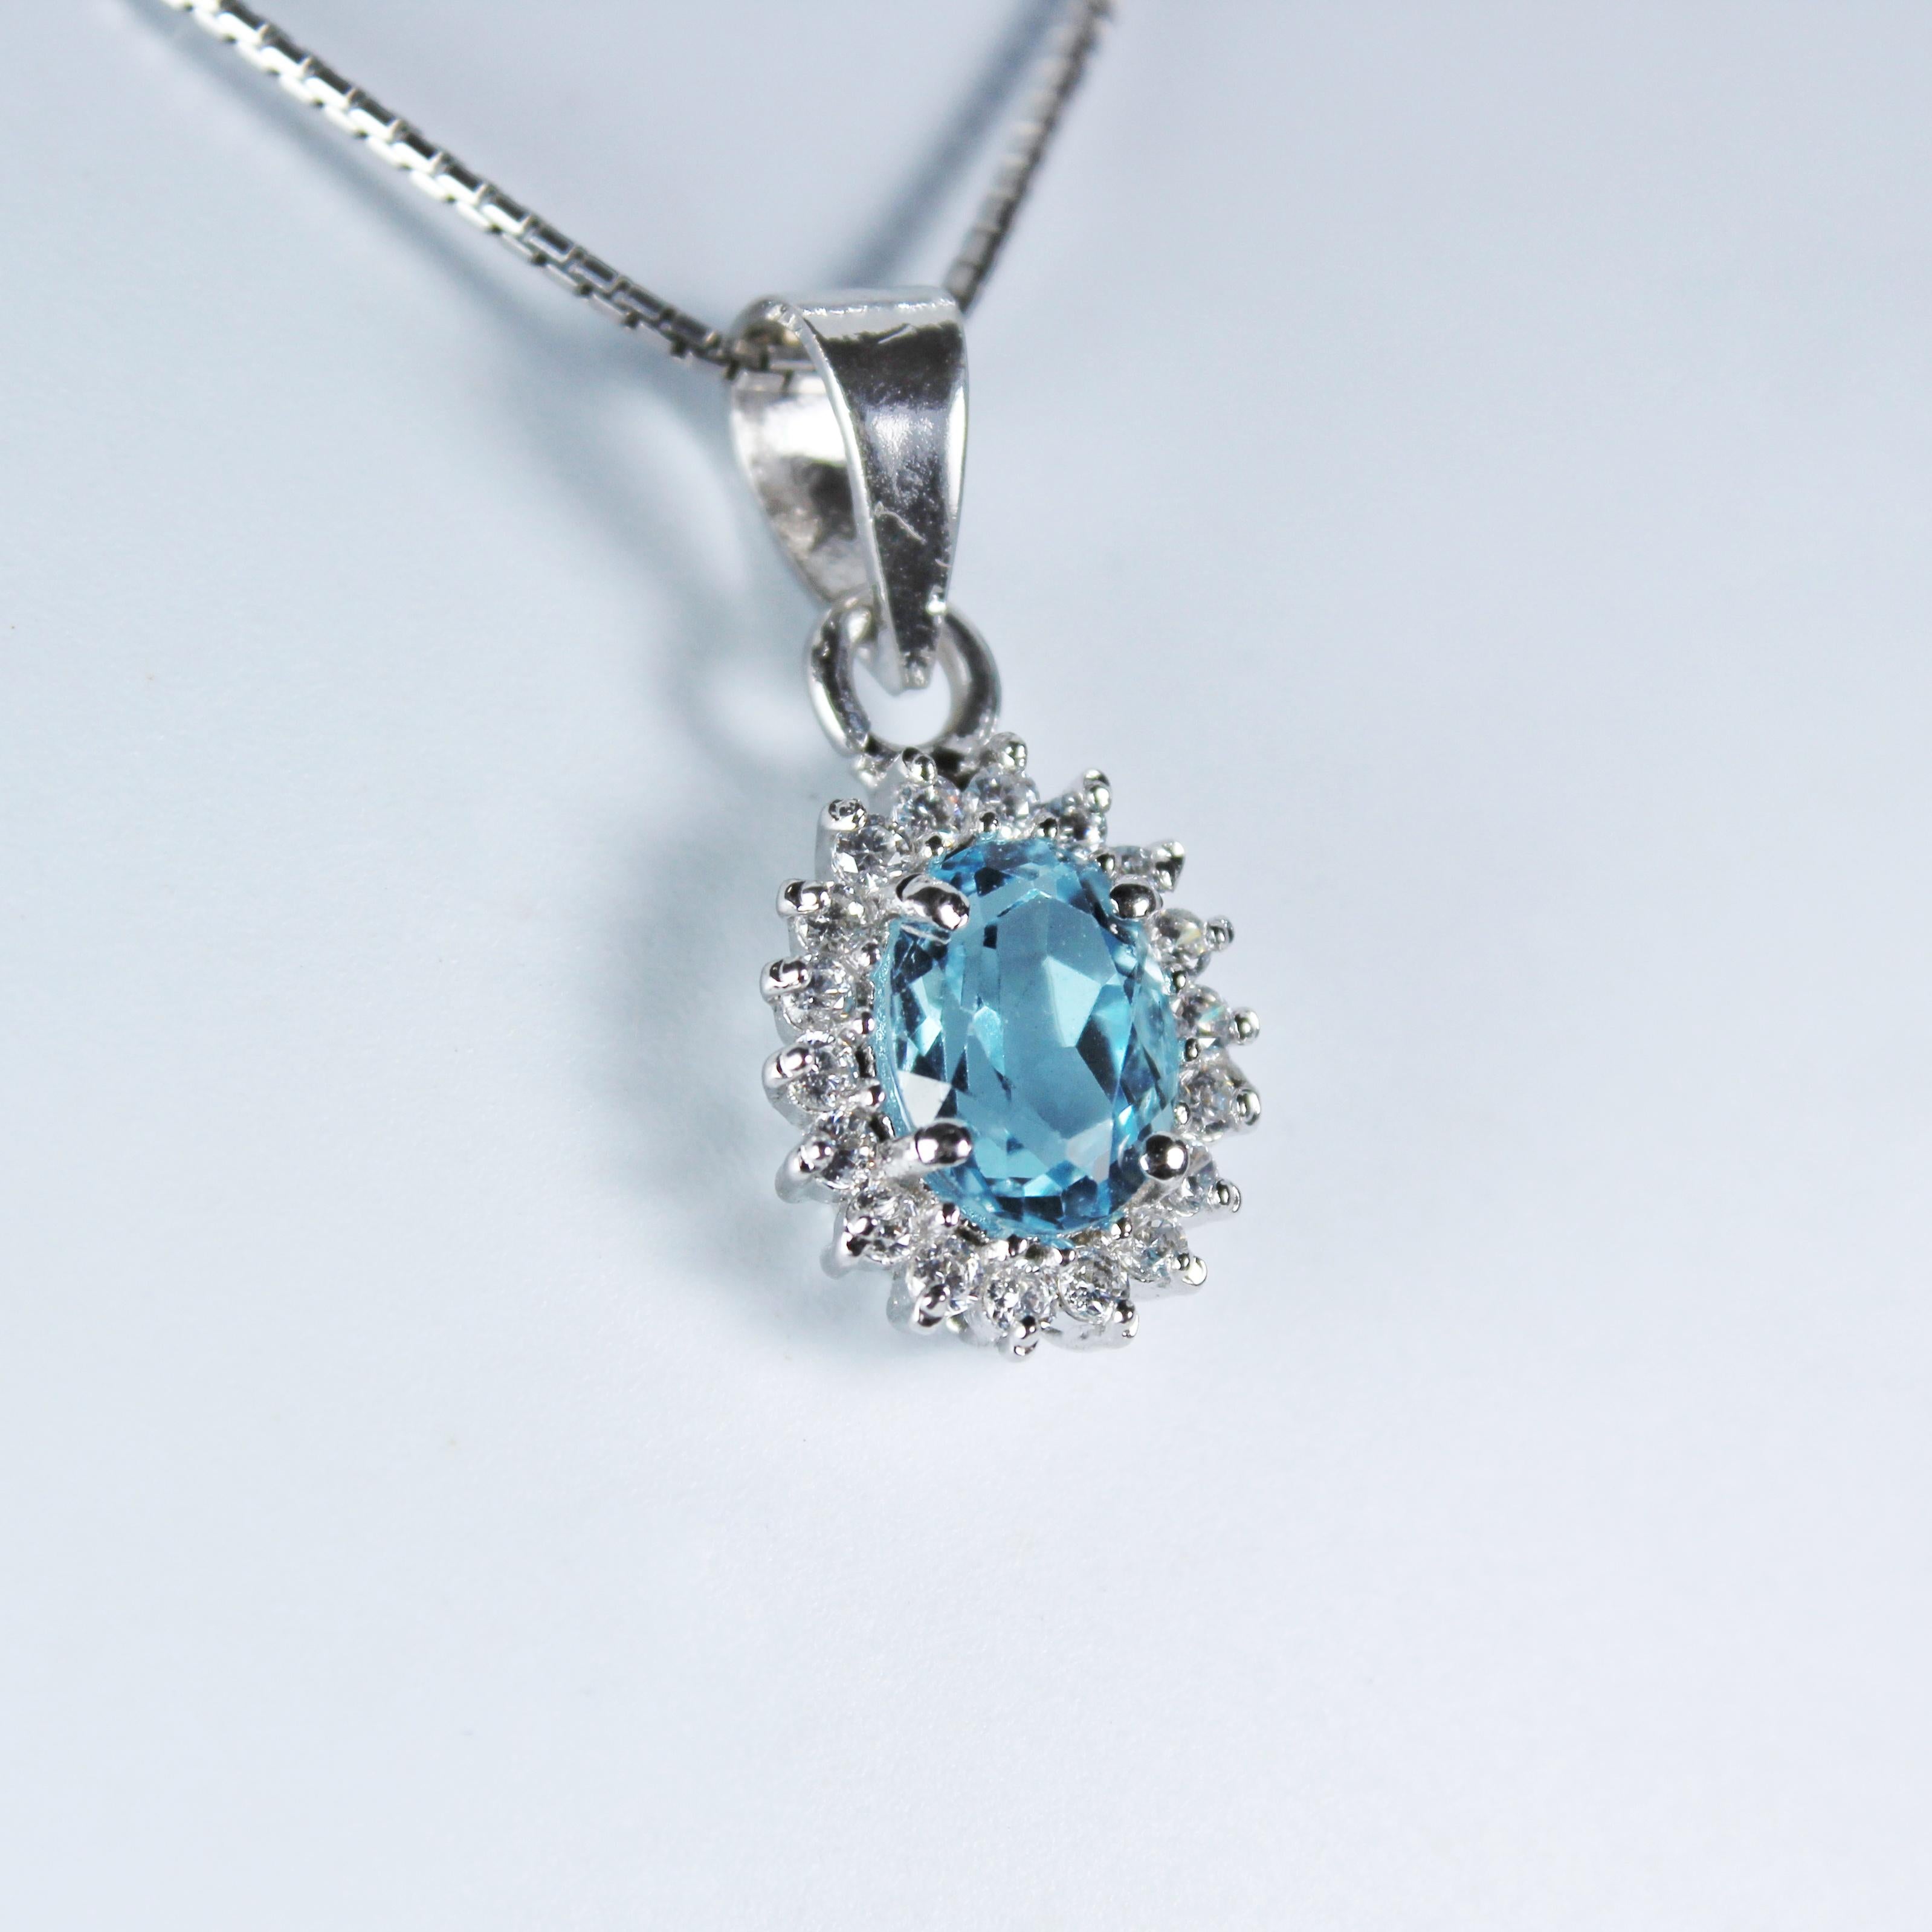 Product Details:

Metal of pendant - Sterling Silver
Diamonds - synthetic
Pendant size (without bail) - 12 x 10 mm
Pendant gross Weight - 1.80 Grams
Gemstone - Aquamarine
Stone weight - 0.50 Carat
Stone shape - Oval
Stone size - 8 x 6 mm

Timeless